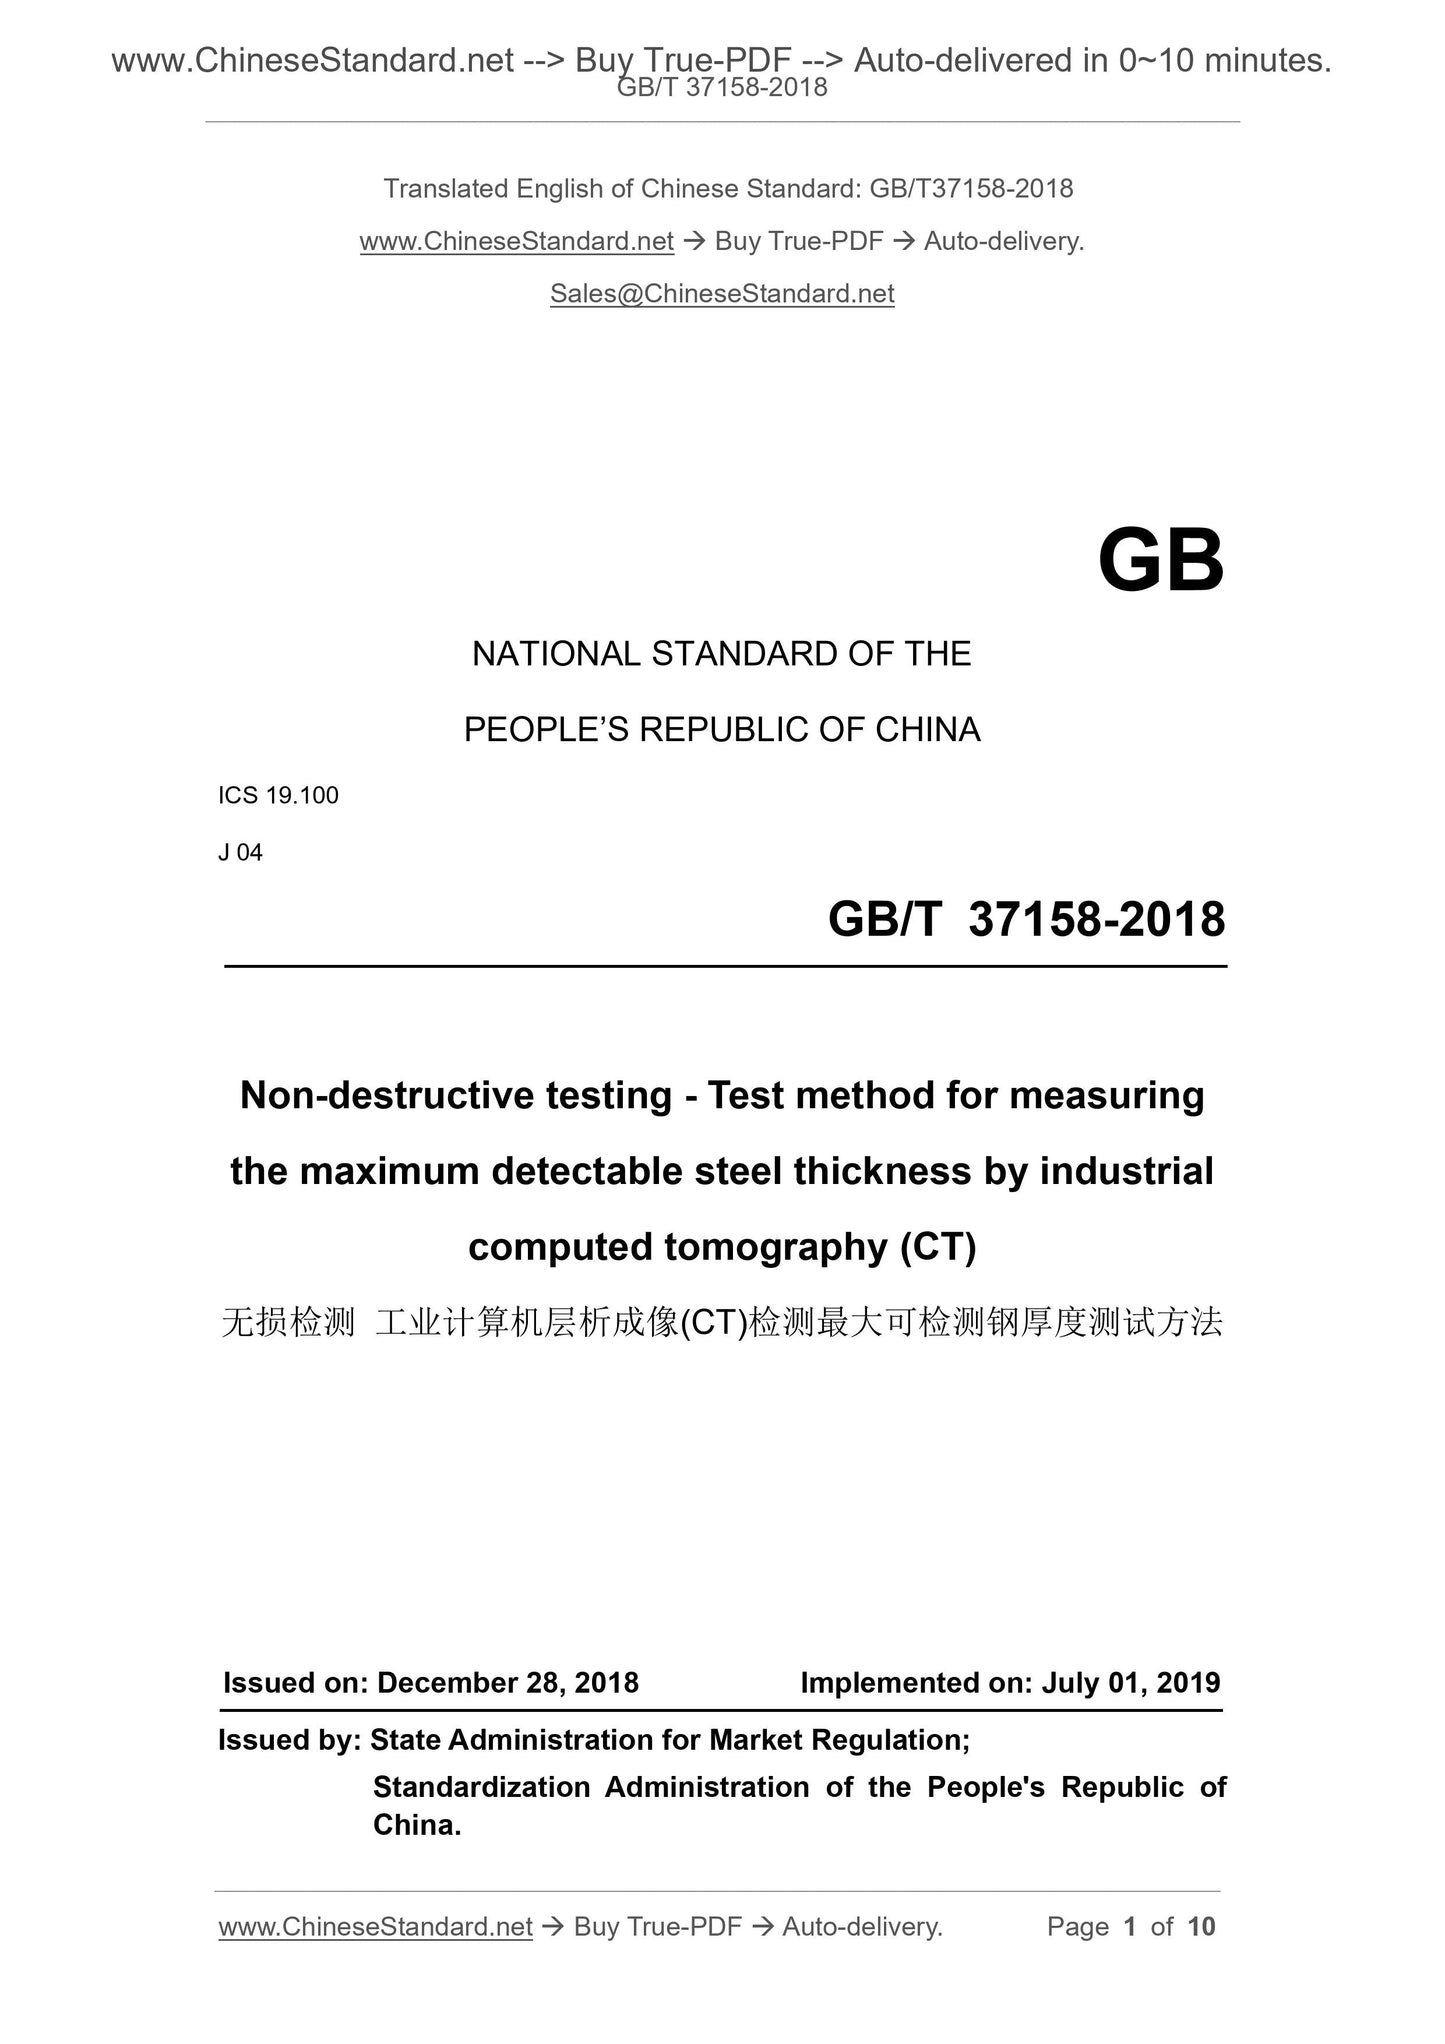 GB/T 37158-2018 Page 1